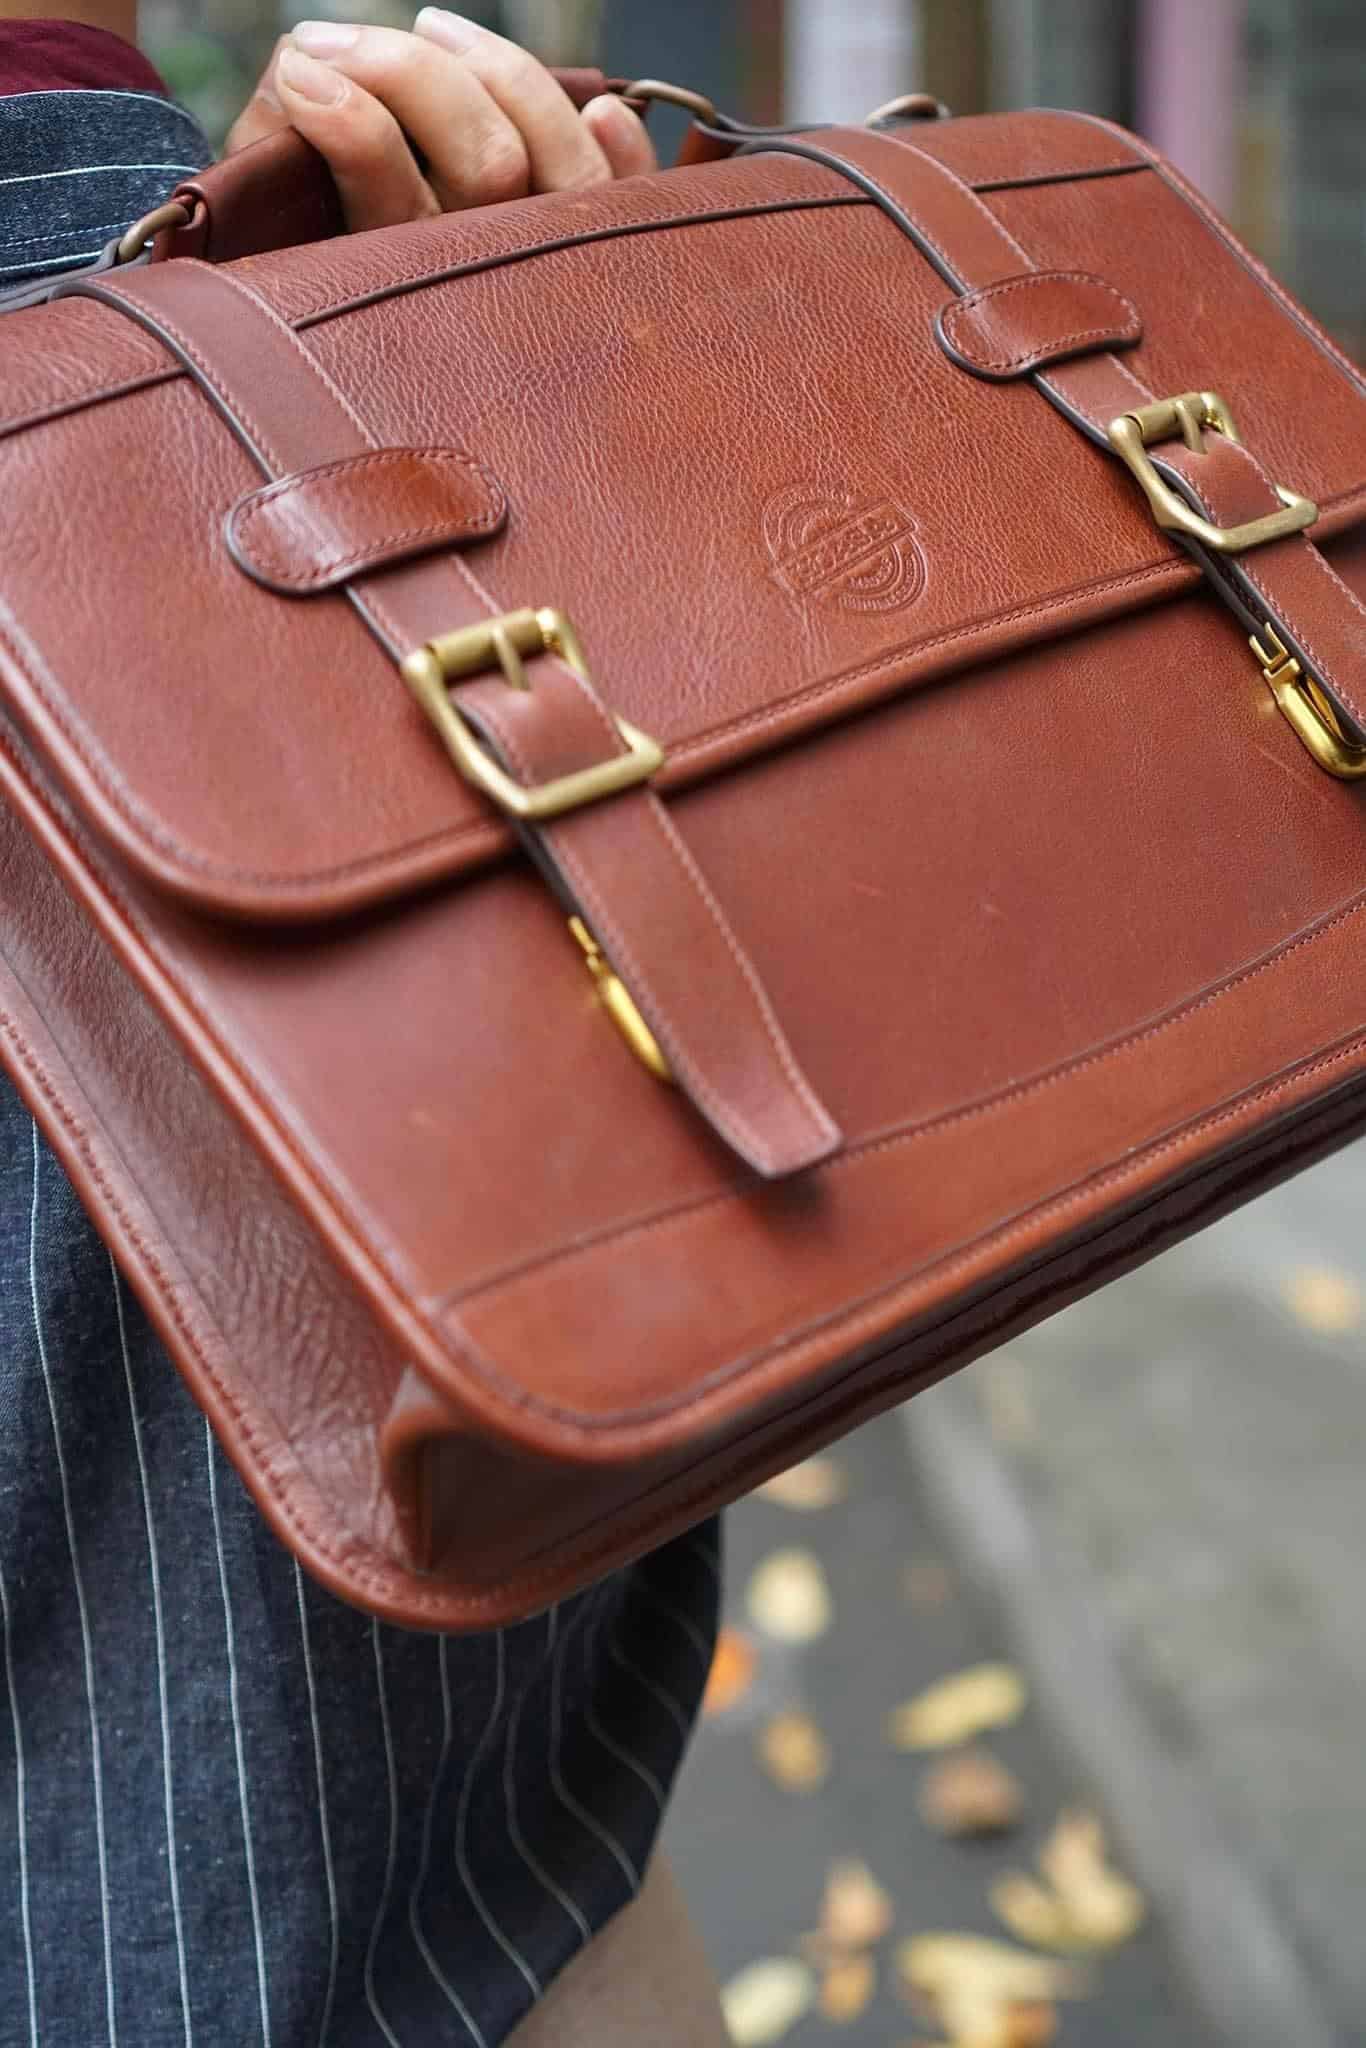 leather briefcase3